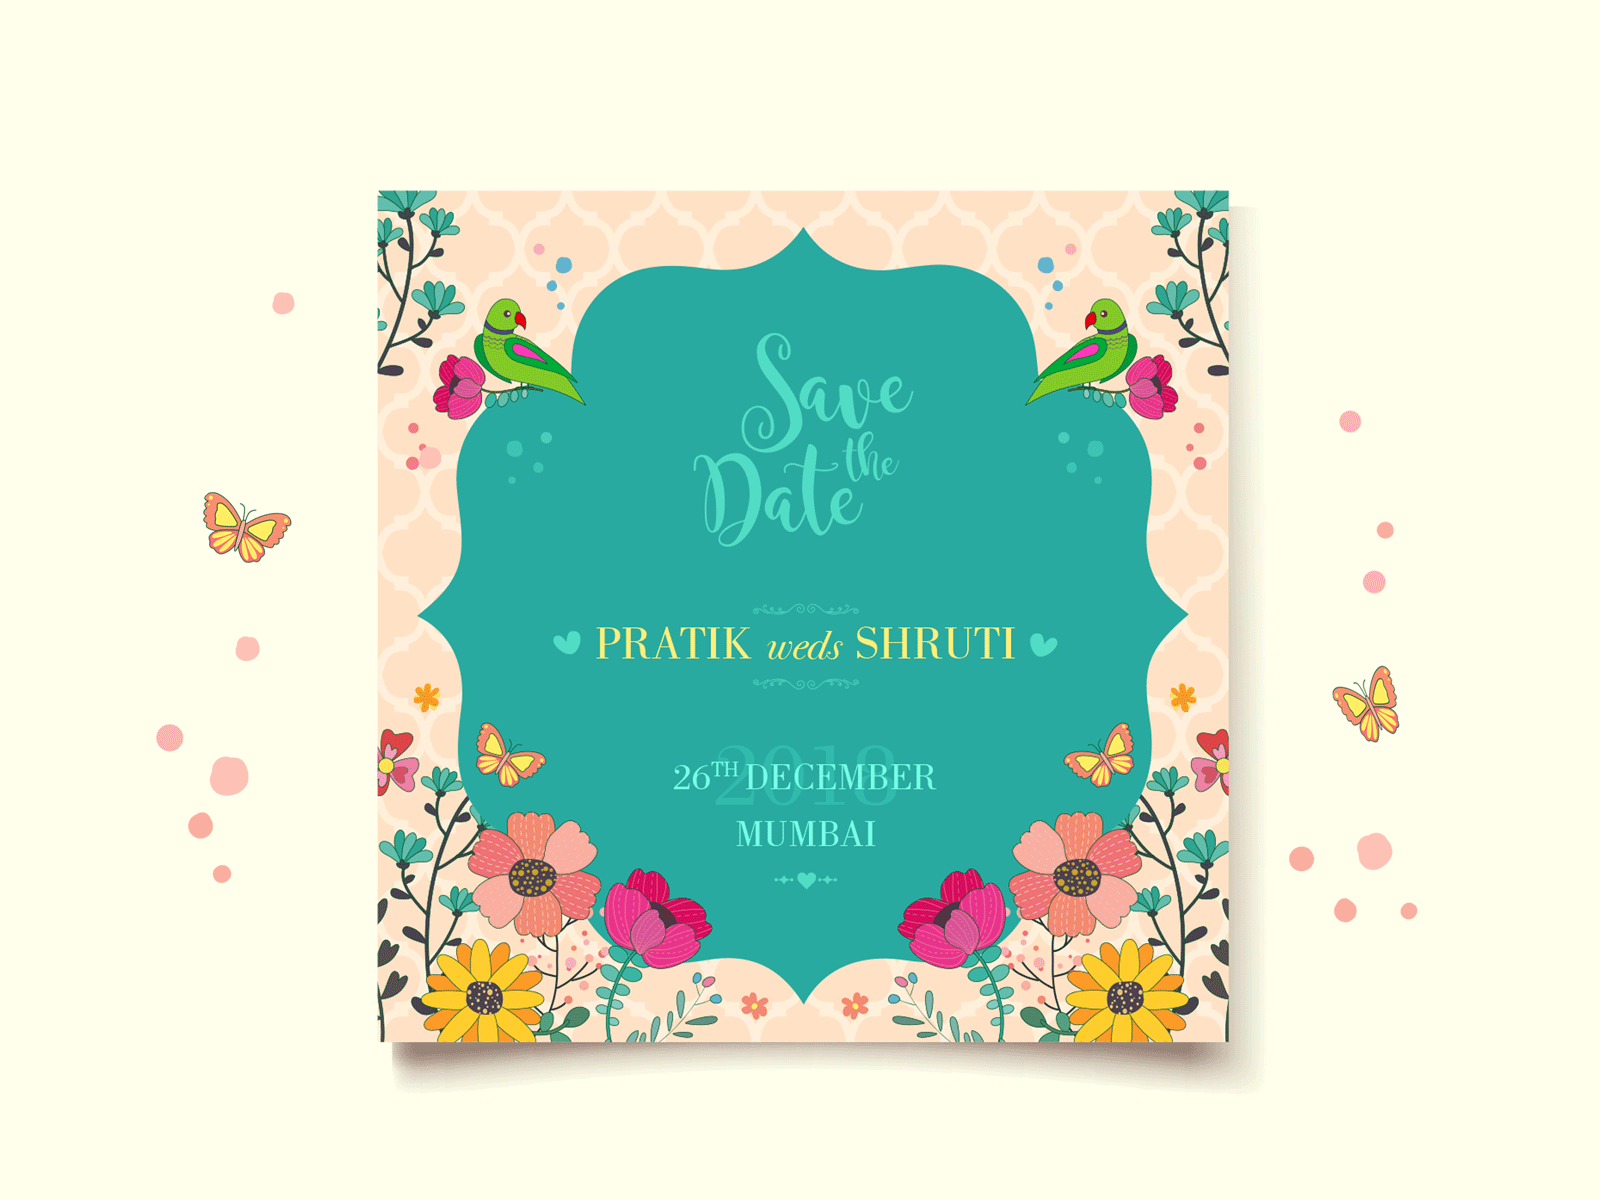 WEDDING INVITE : Save The Date butterfly evite floral illustration illustrator india indian wedding invitation invite save the date turquoise vector wedding card wedding invitation wedding invite